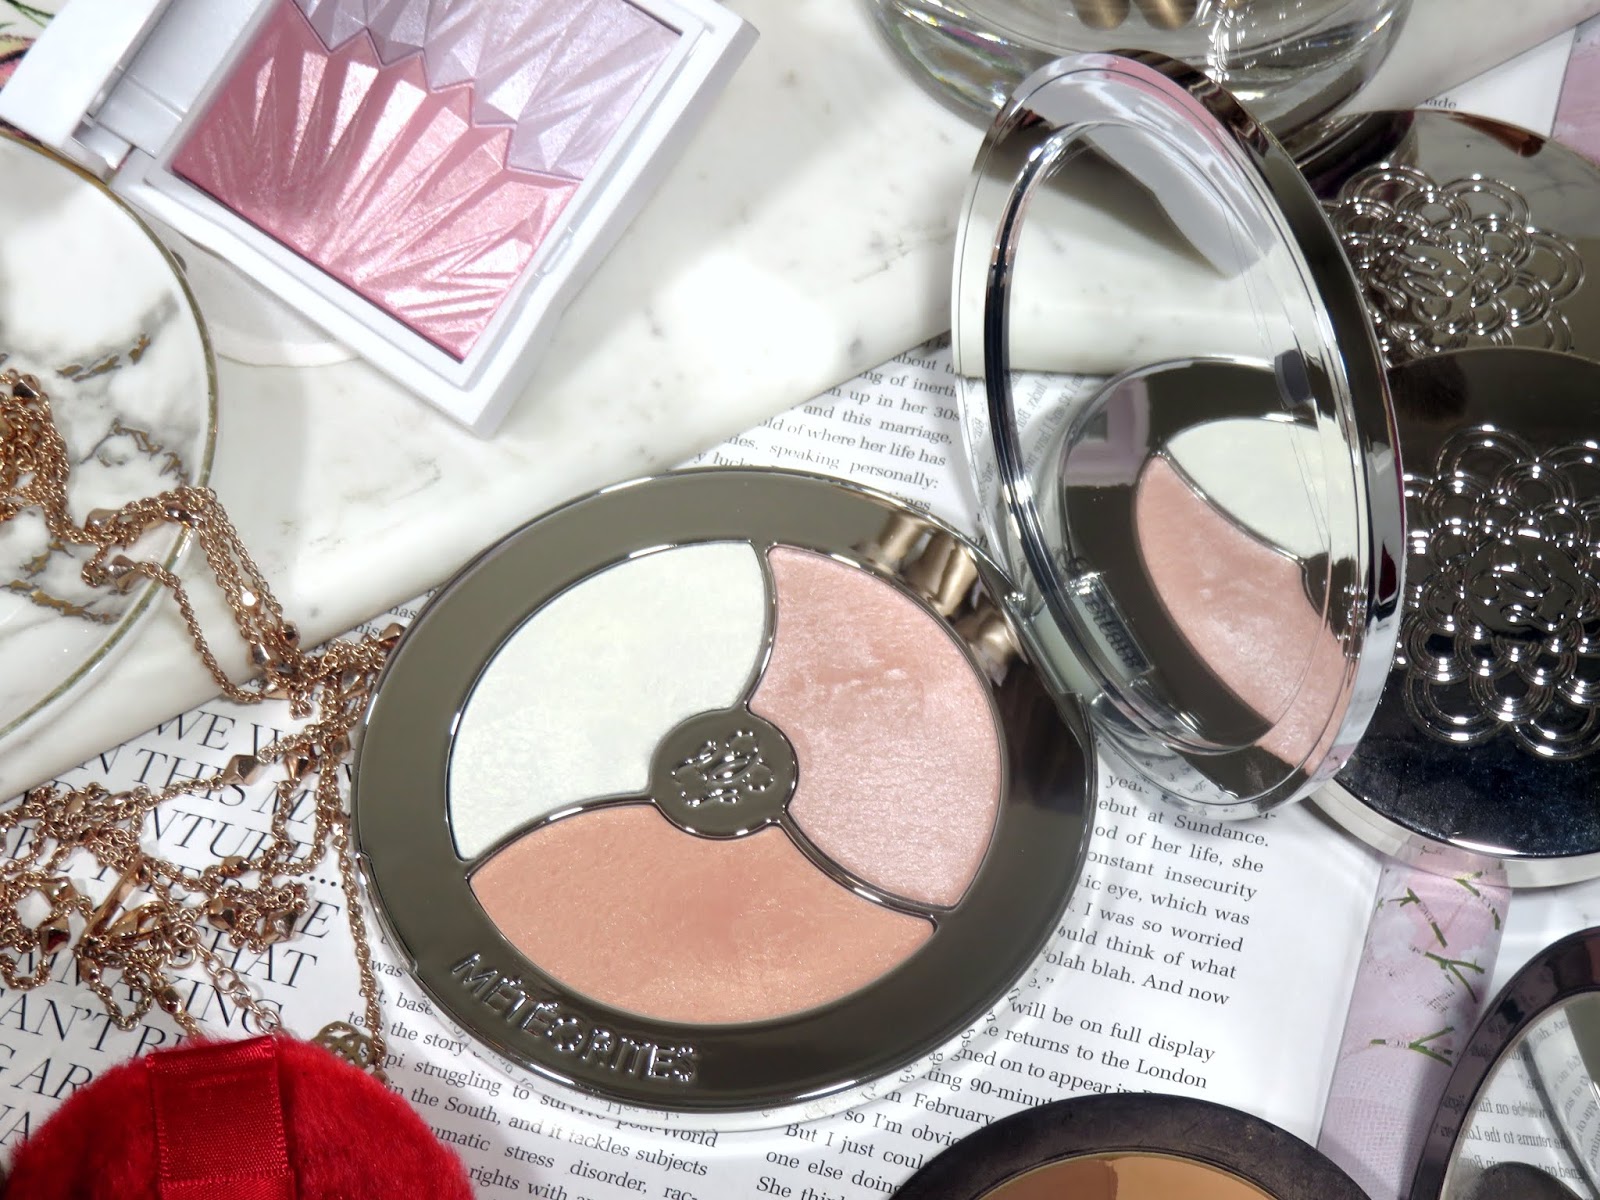 Guerlain Meteorites Highlighter Palette Review and Swatches